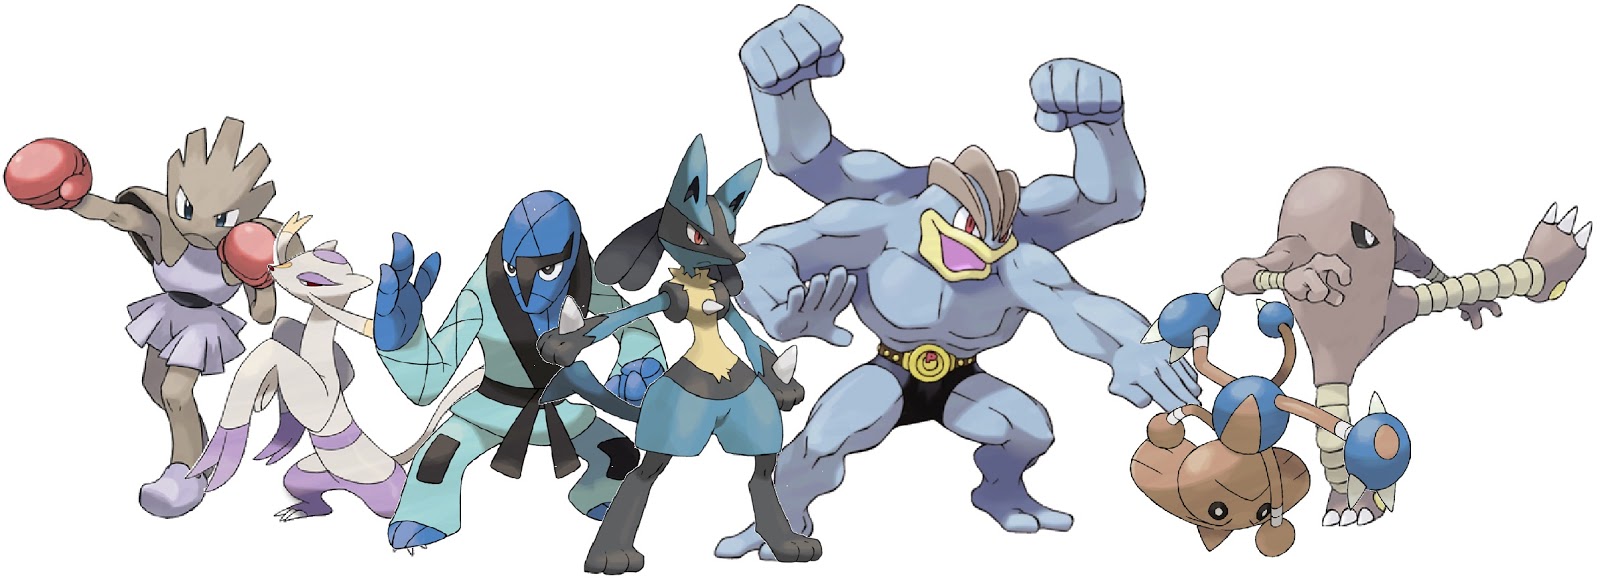 Ultimate fighters by Pokemon Type